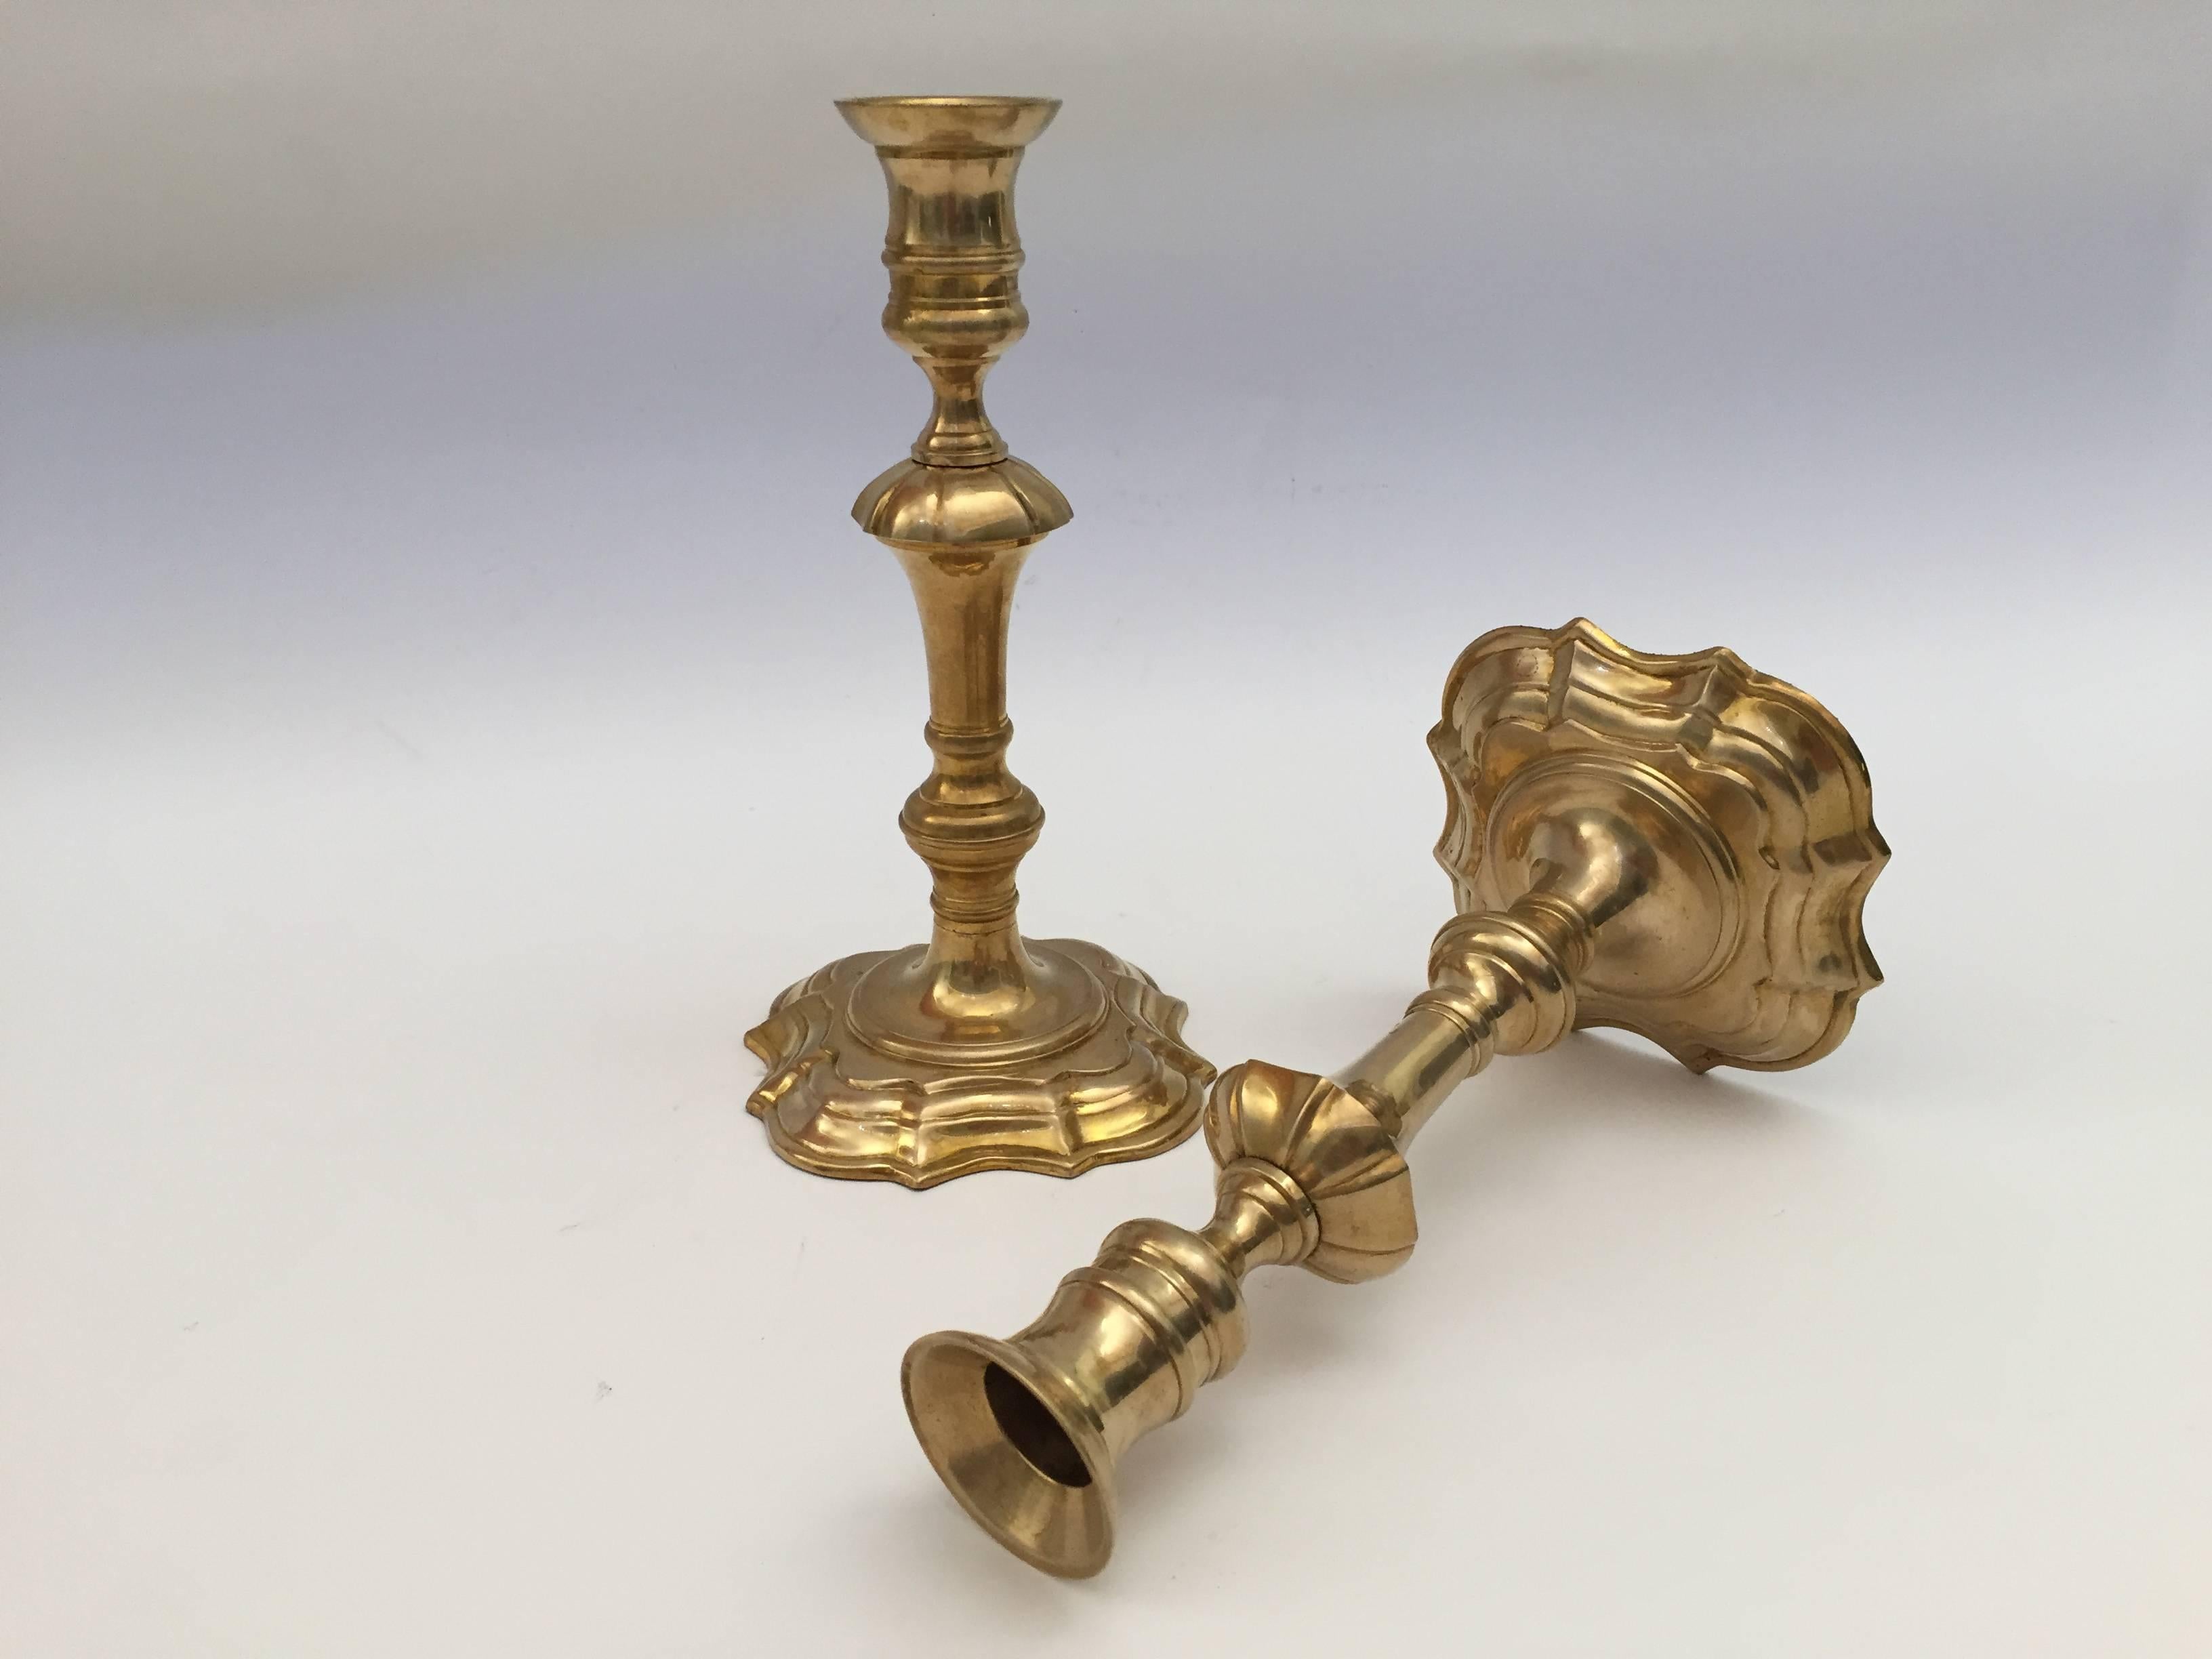 Pair of Georgian brass candlesticks. 
The bases are square with cut corners and the sticks are of seamed construction.
Nice patina.
Great brass decorative art objects.